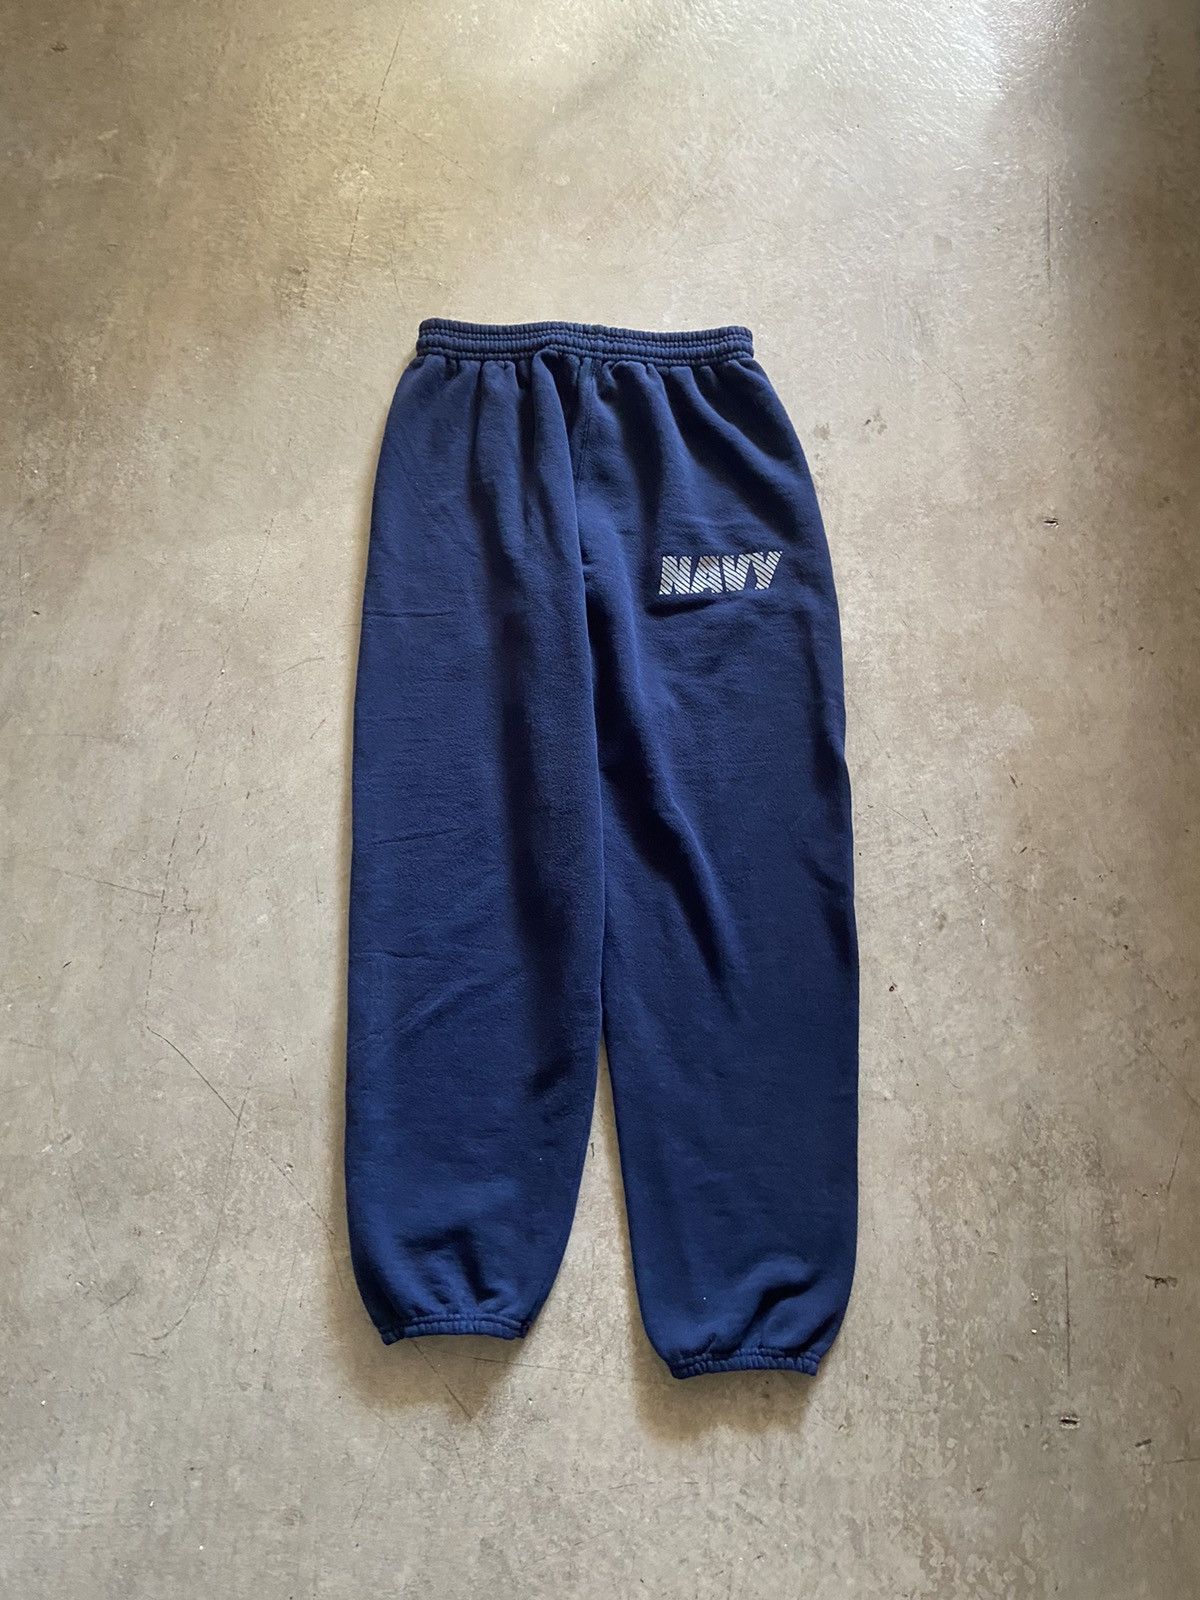 Vintage 90s Vintage Navy Soffe Made in USA Sweatpants Russell Type ...